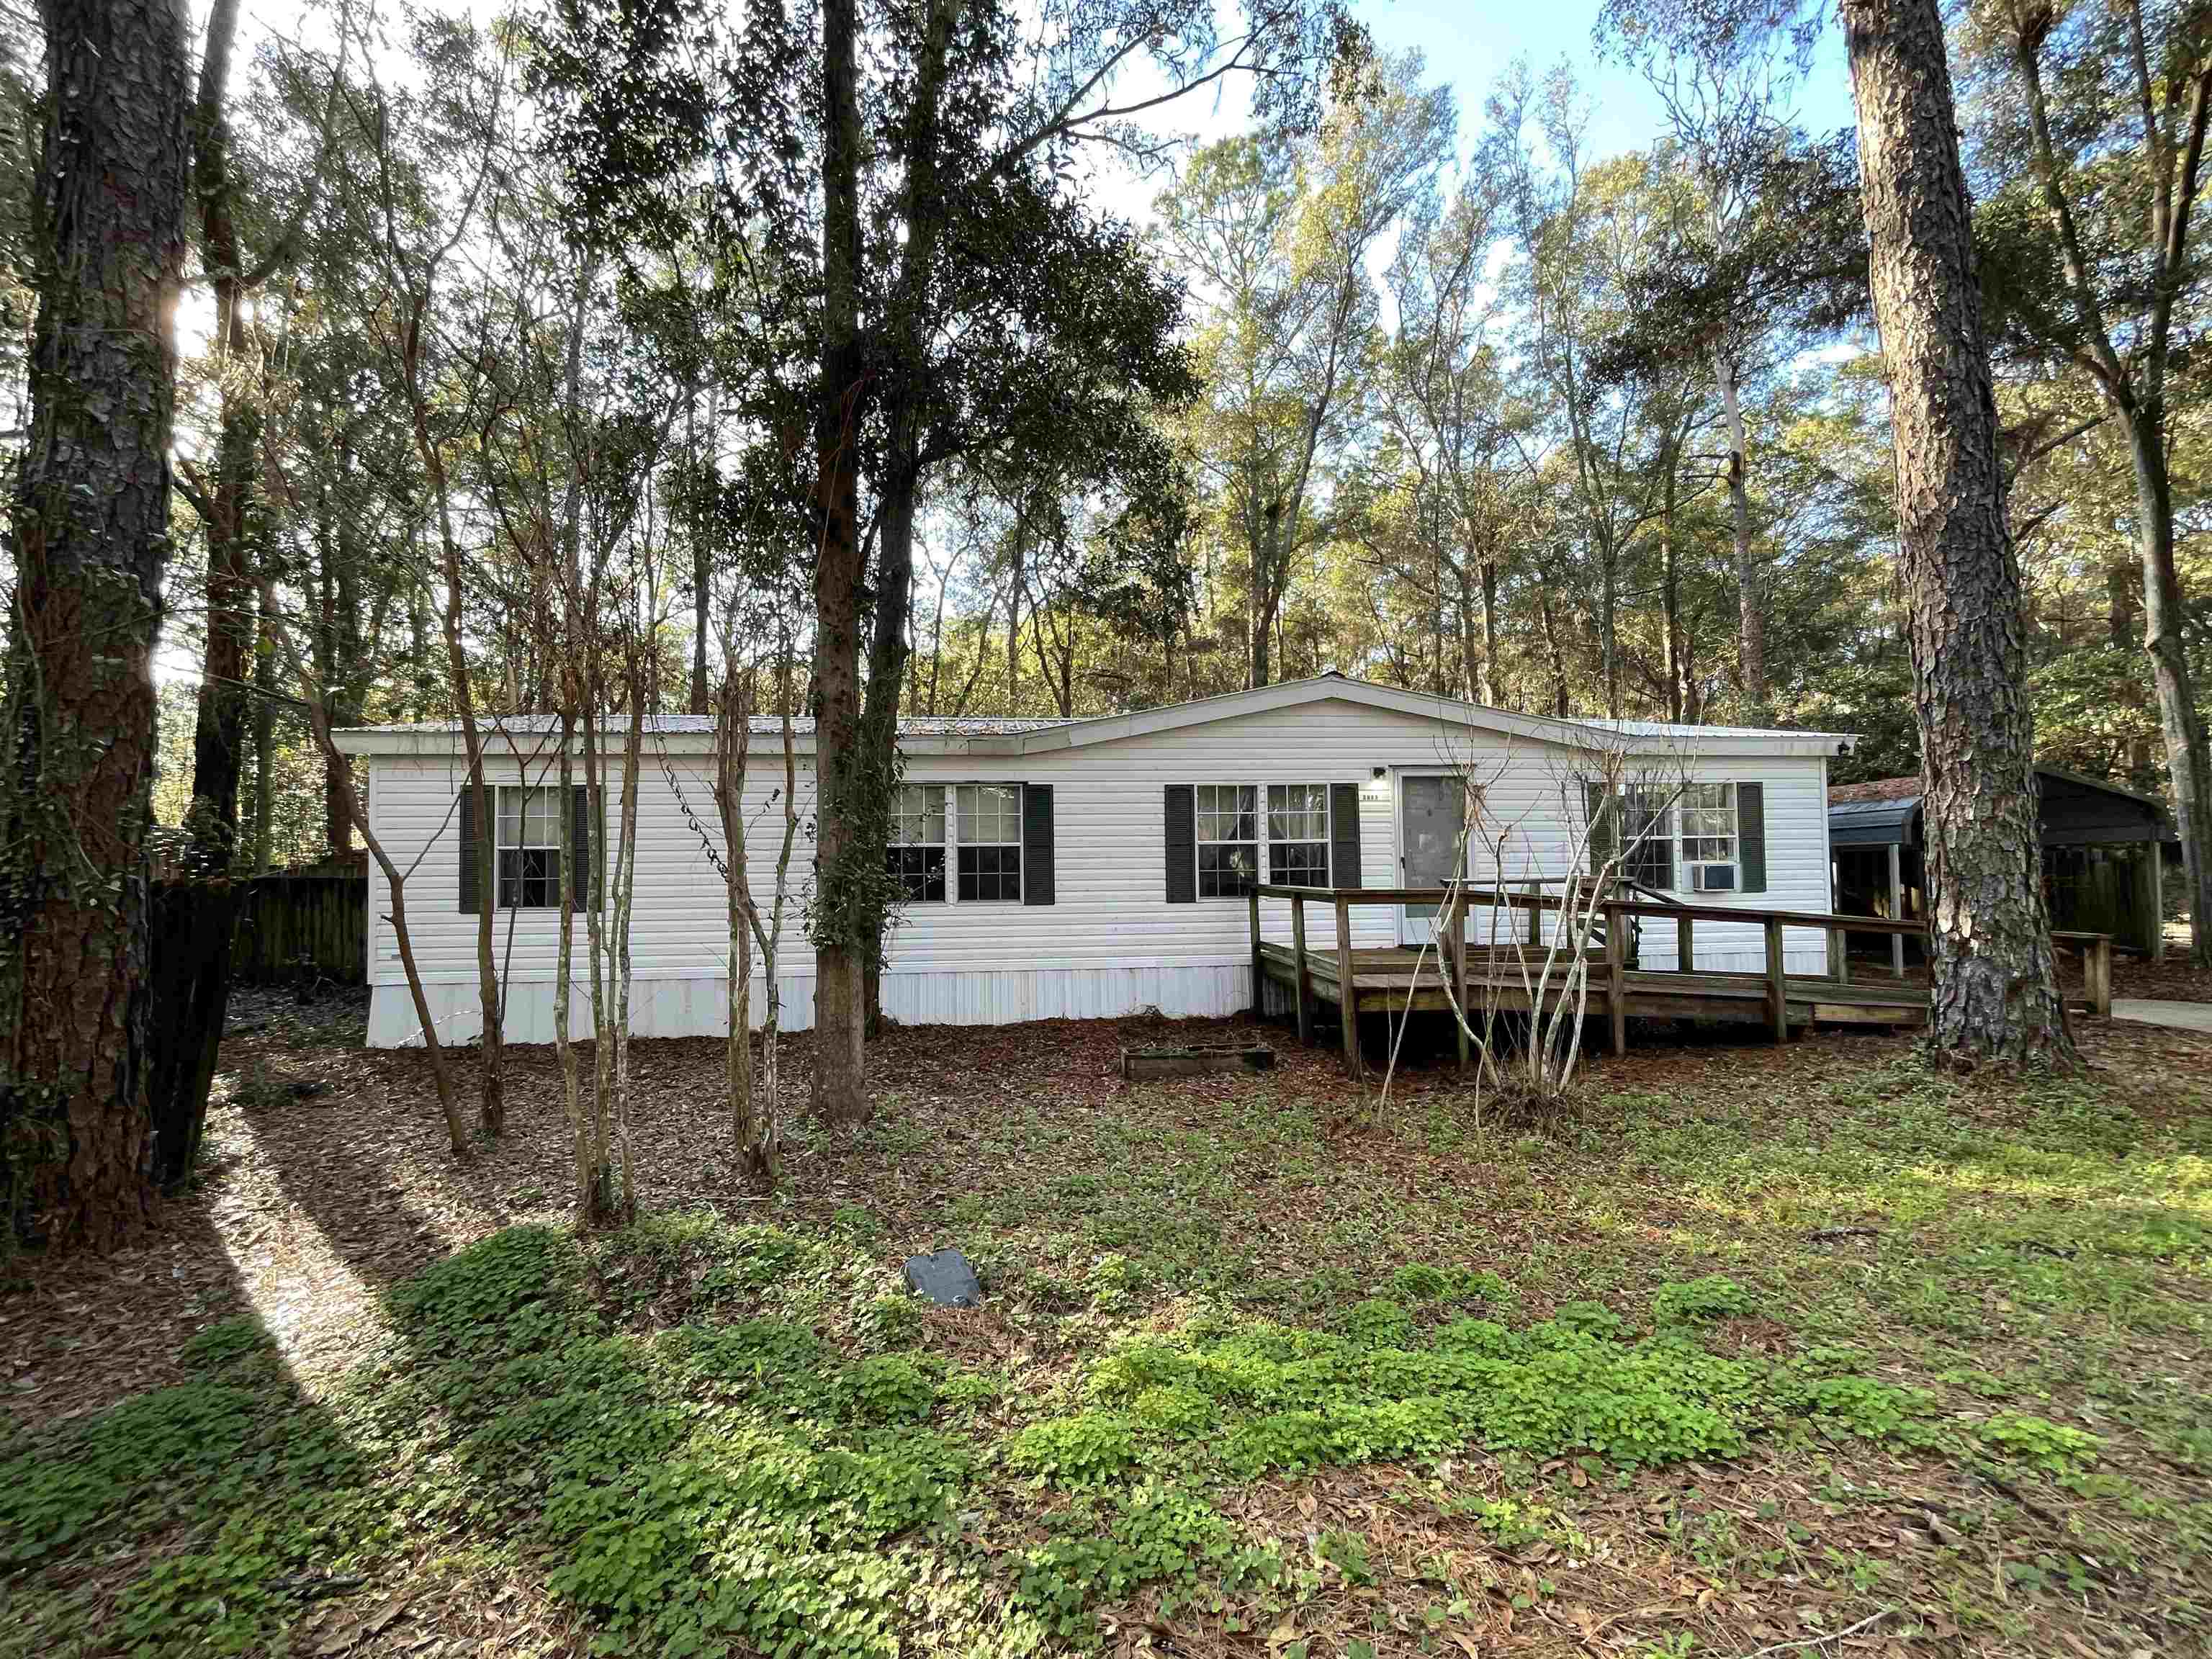 Handyman special! This 3 bedroom 2 bath mobile home is ready to be updated and customized to fit your needs! Great split floorplan with large living room and kitchen make this home feel very spacious.